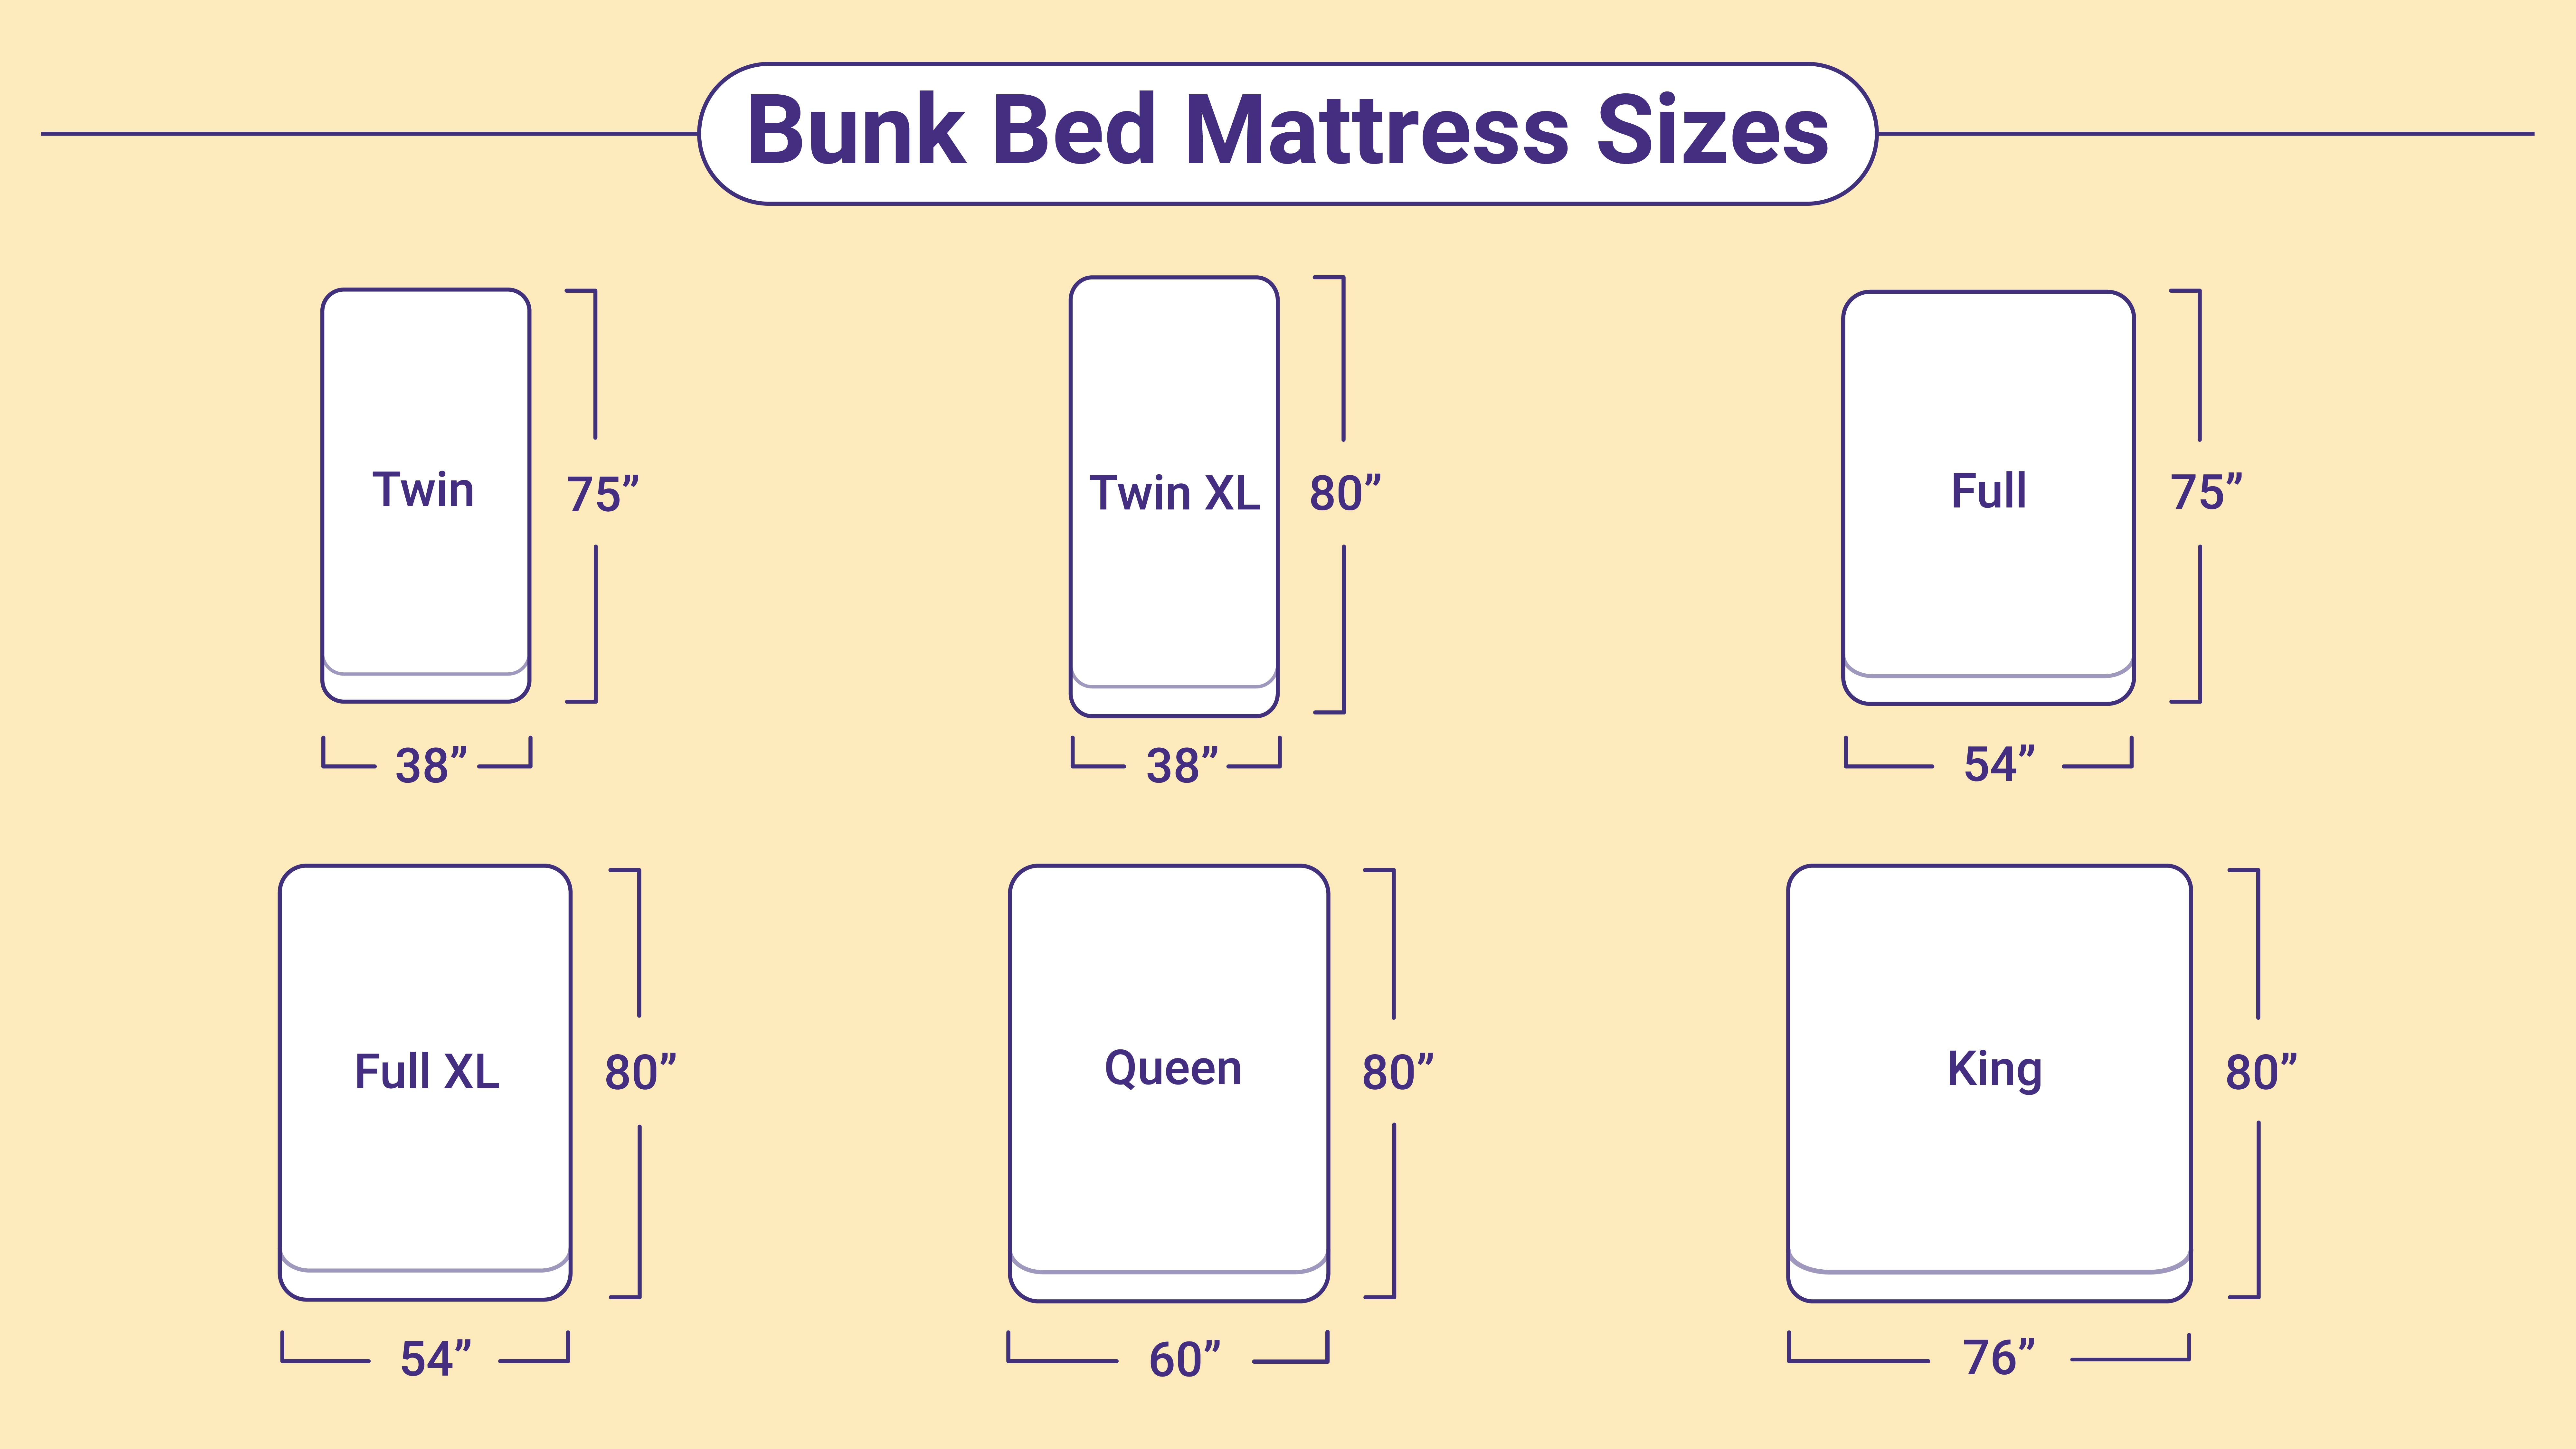 Bunk Bed Mattress Sizes And Dimensions, Standard Bunk Bed Dimensions Height